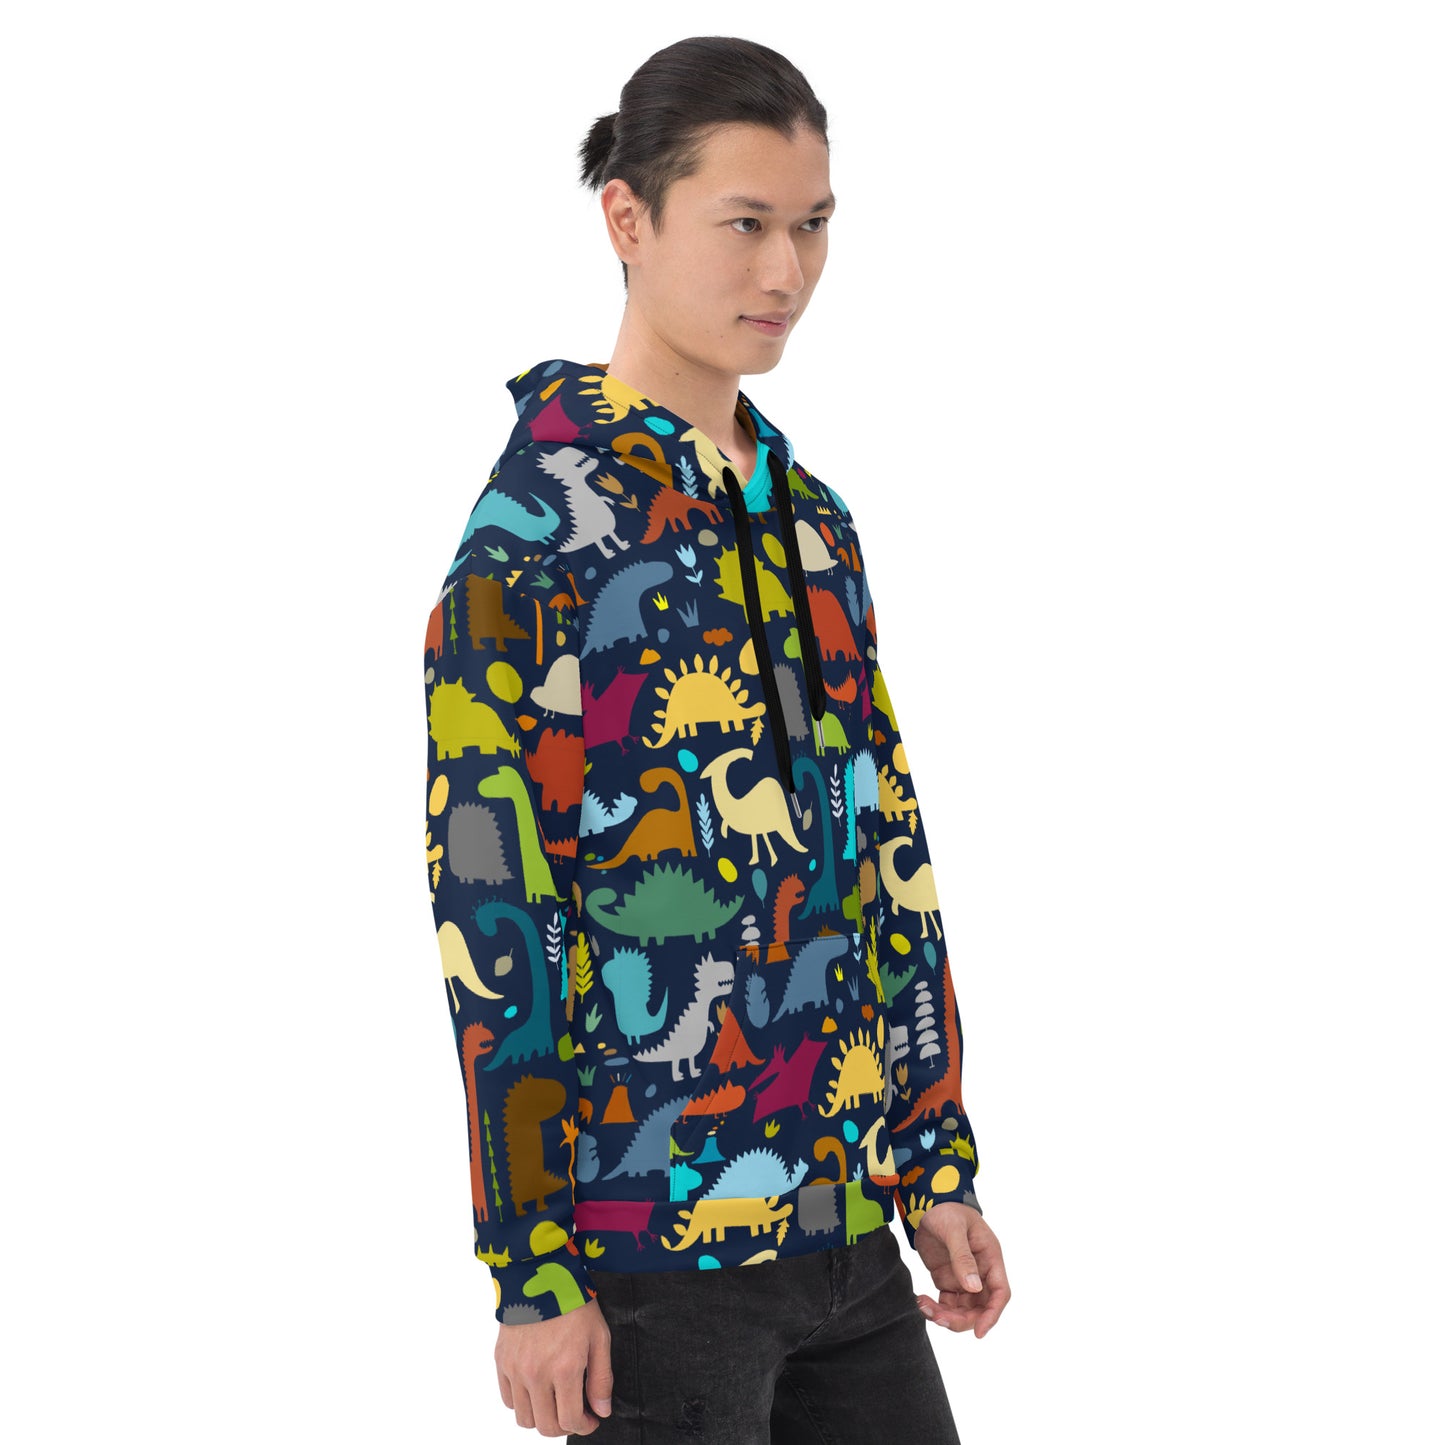 Unisex all over print Hoodie with Dinosaurs